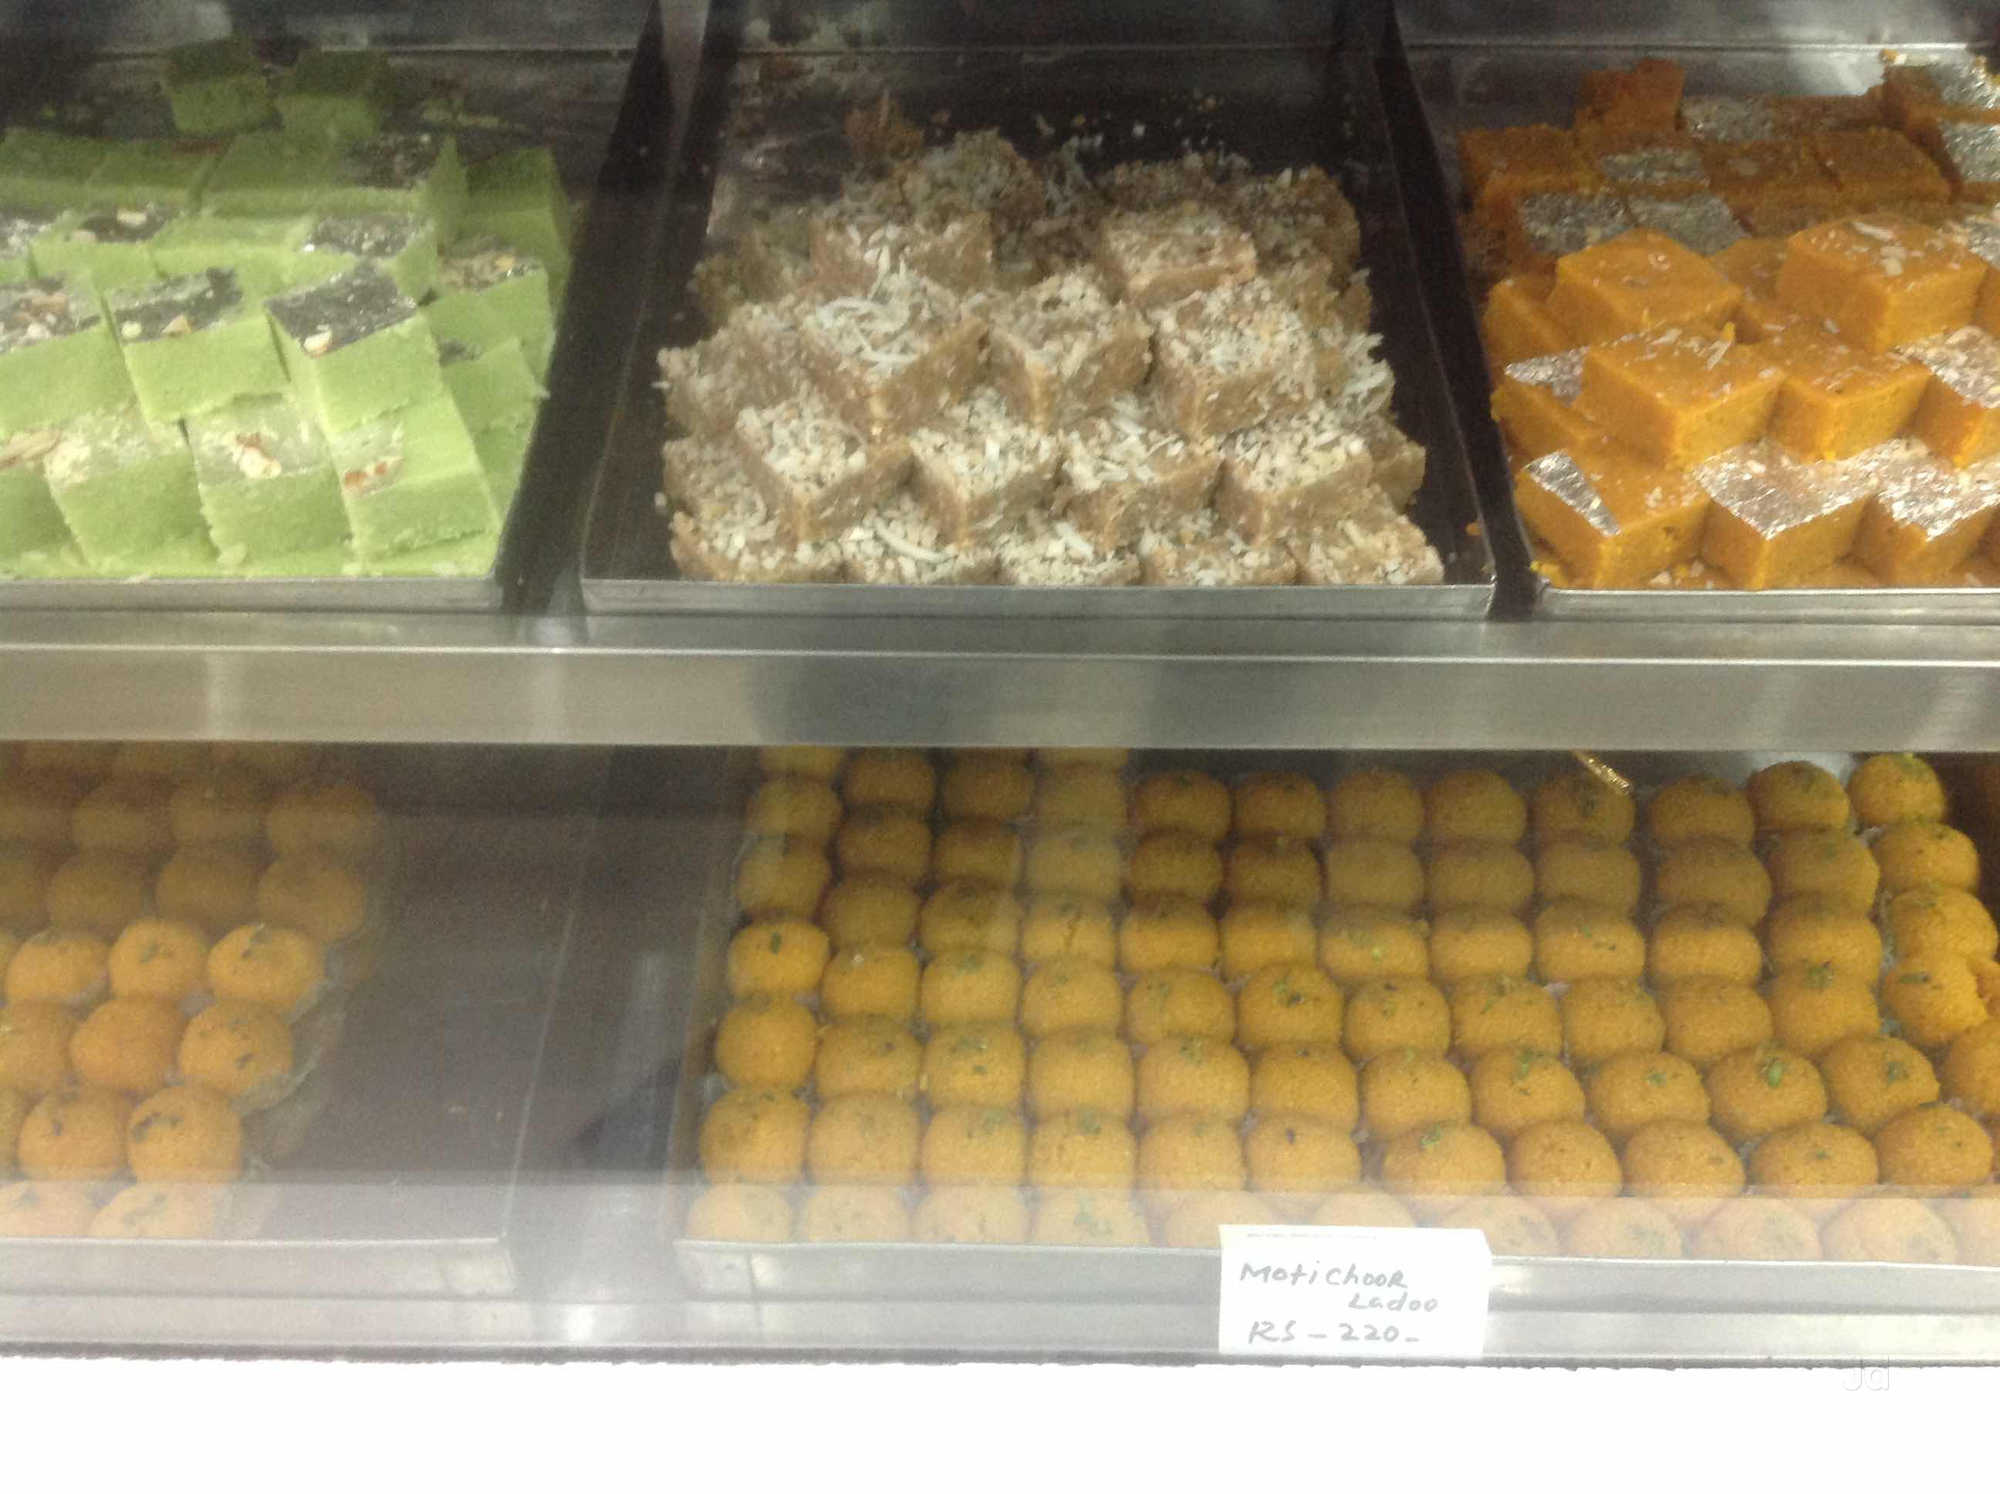 Shiv Sweets, Sector 7, Chandigarh - Cake Shops - Justdial